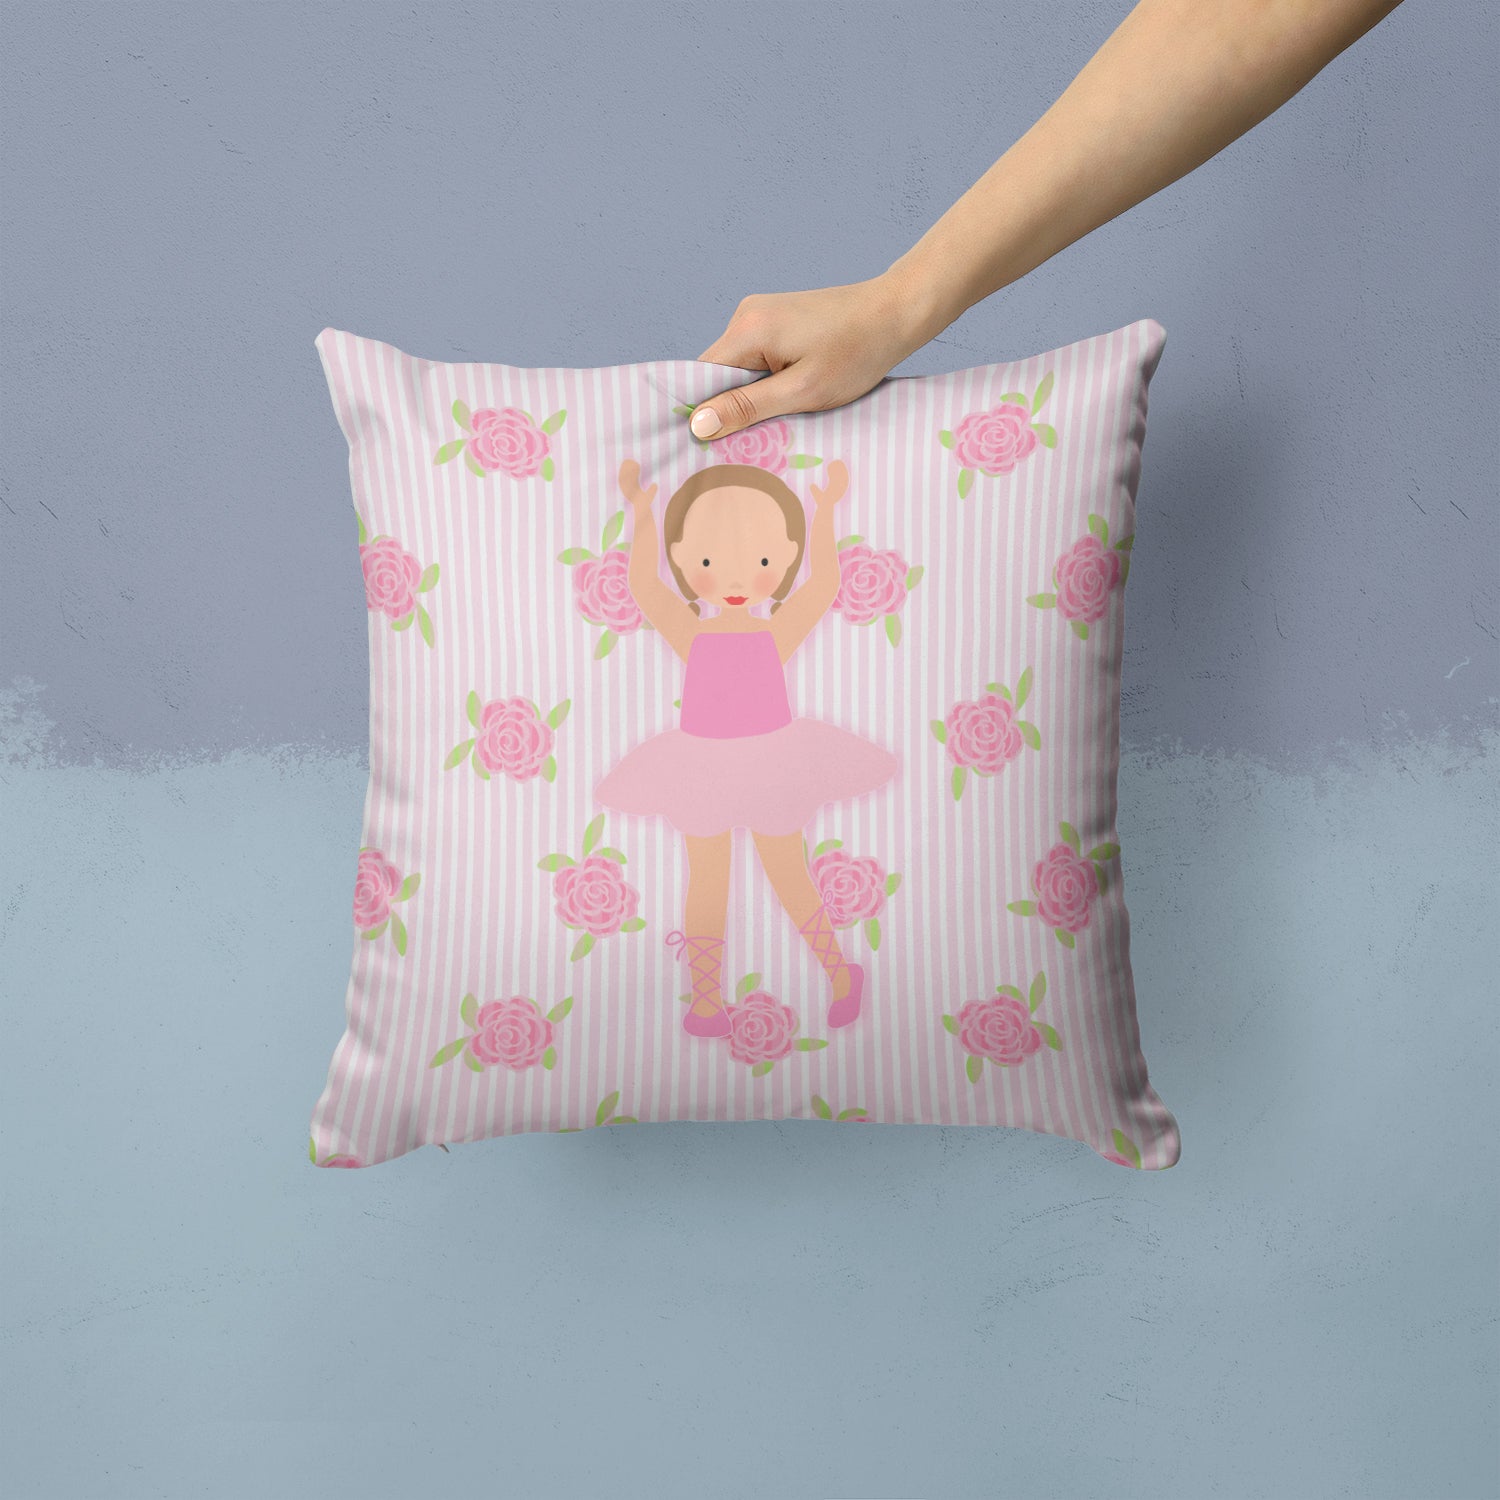 Ballerina Brown Hair Ponytails Fabric Decorative Pillow BB5189PW1414 - the-store.com